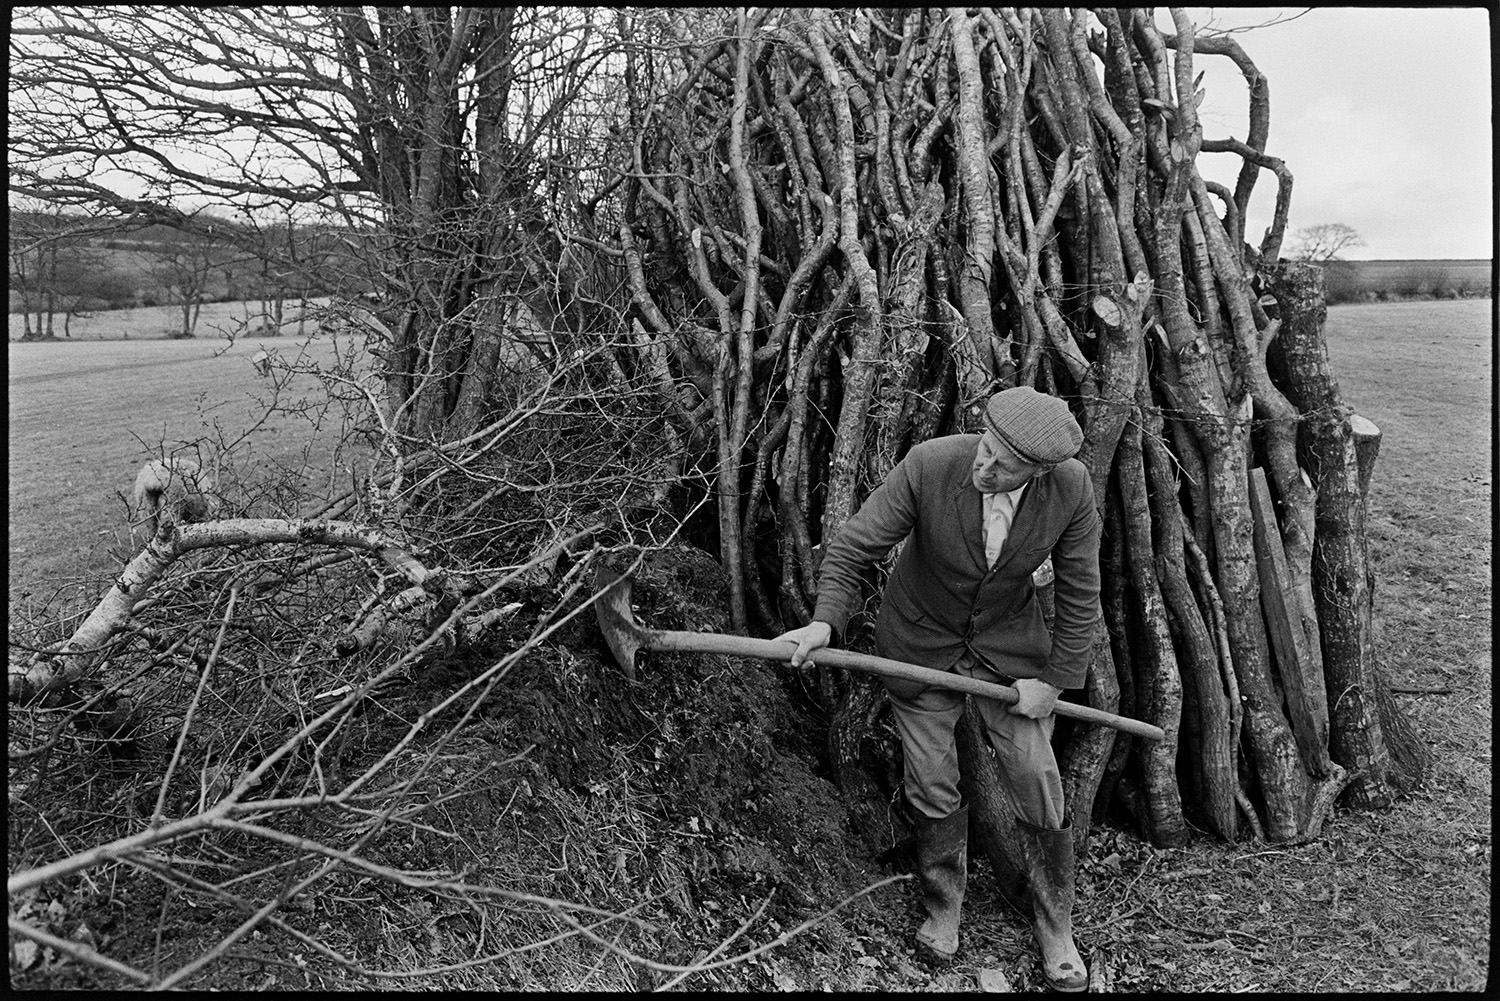 Man building up turf hedgebank (clatting), next to woodpile. 
[Mr Allin clatting or building up a hedge with pieces of turf, using a shovel, in a field at Rectory Road, Dolton. A woodpile is against the hedge behind him.]